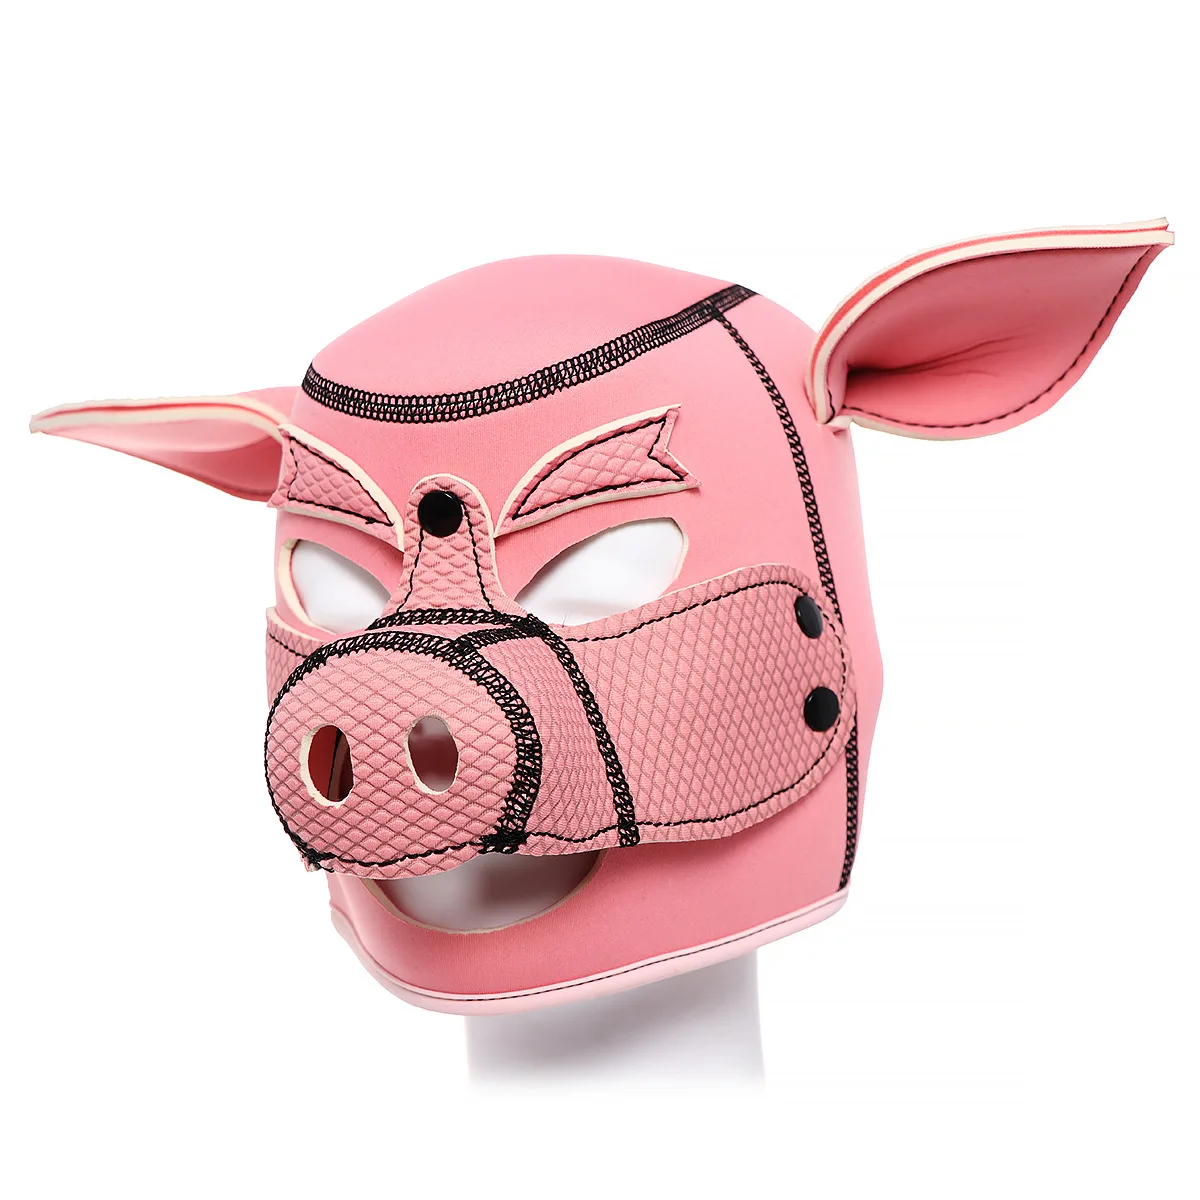 

BDSM Pink Pig Hood Mask New Party Pig Masks Play Bondage Soft Padded Neoprene Pig Slave Role Play Sex Toy For Couples Men Gay